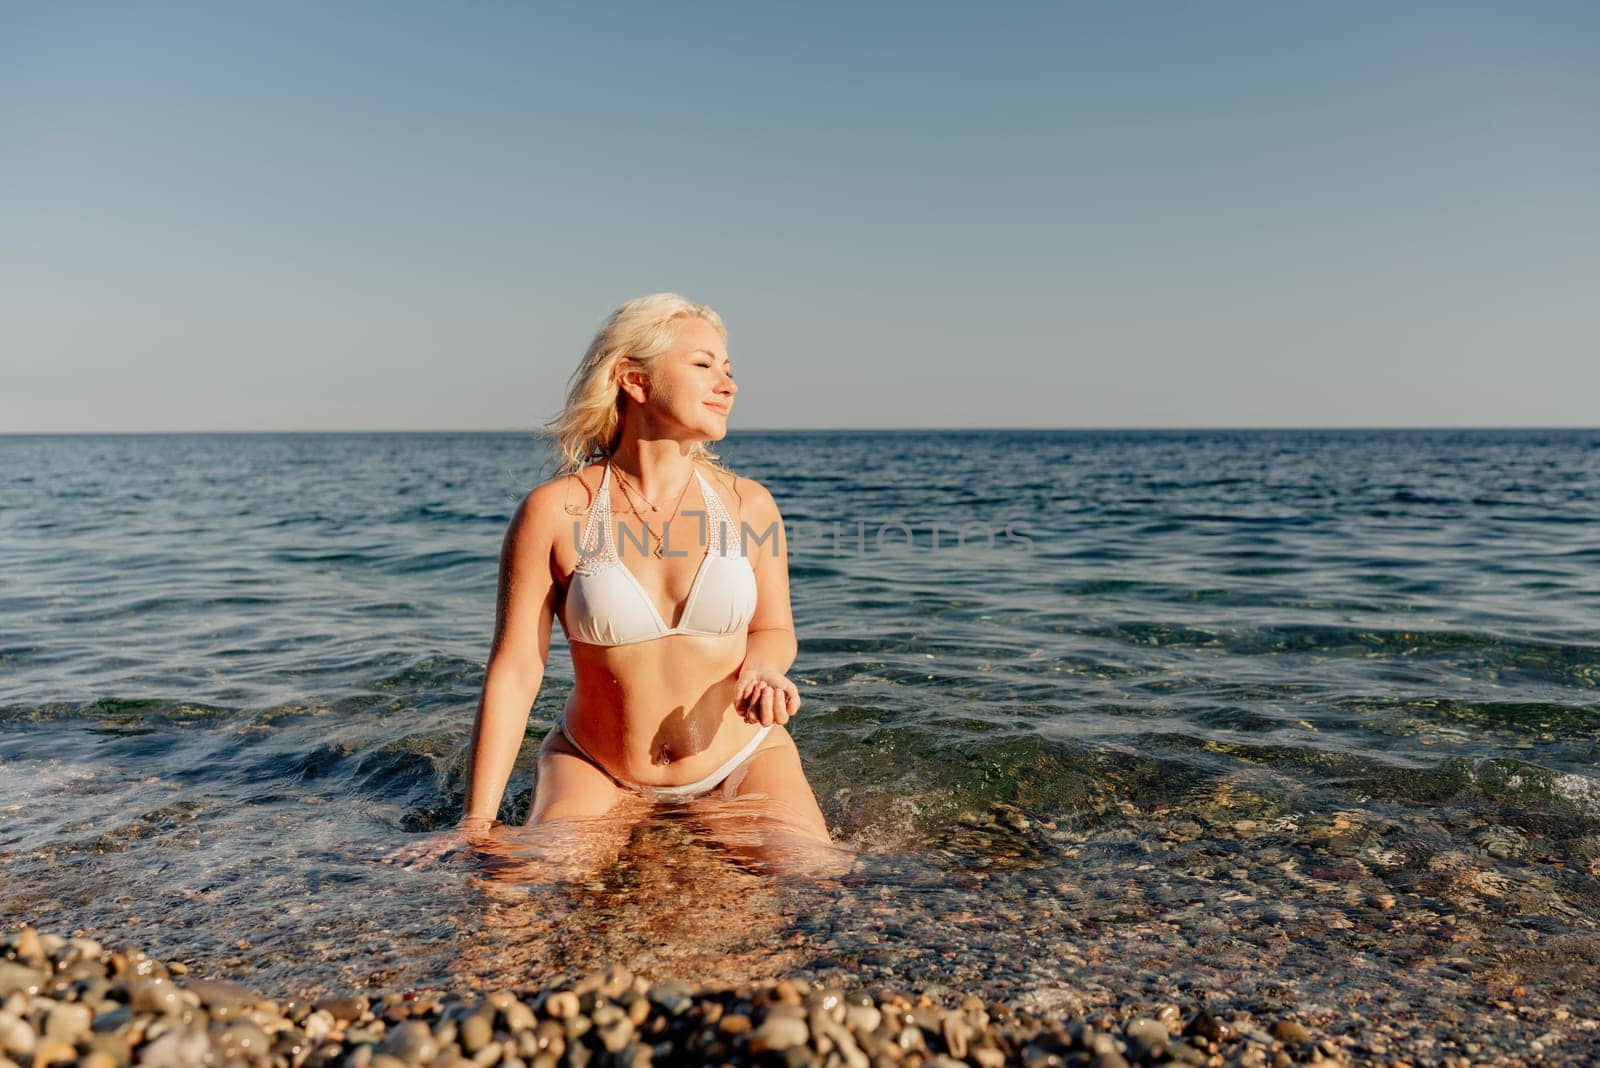 A woman in a bikini is sitting in the ocean. She is smiling and enjoying the water. Scene is happy and relaxed